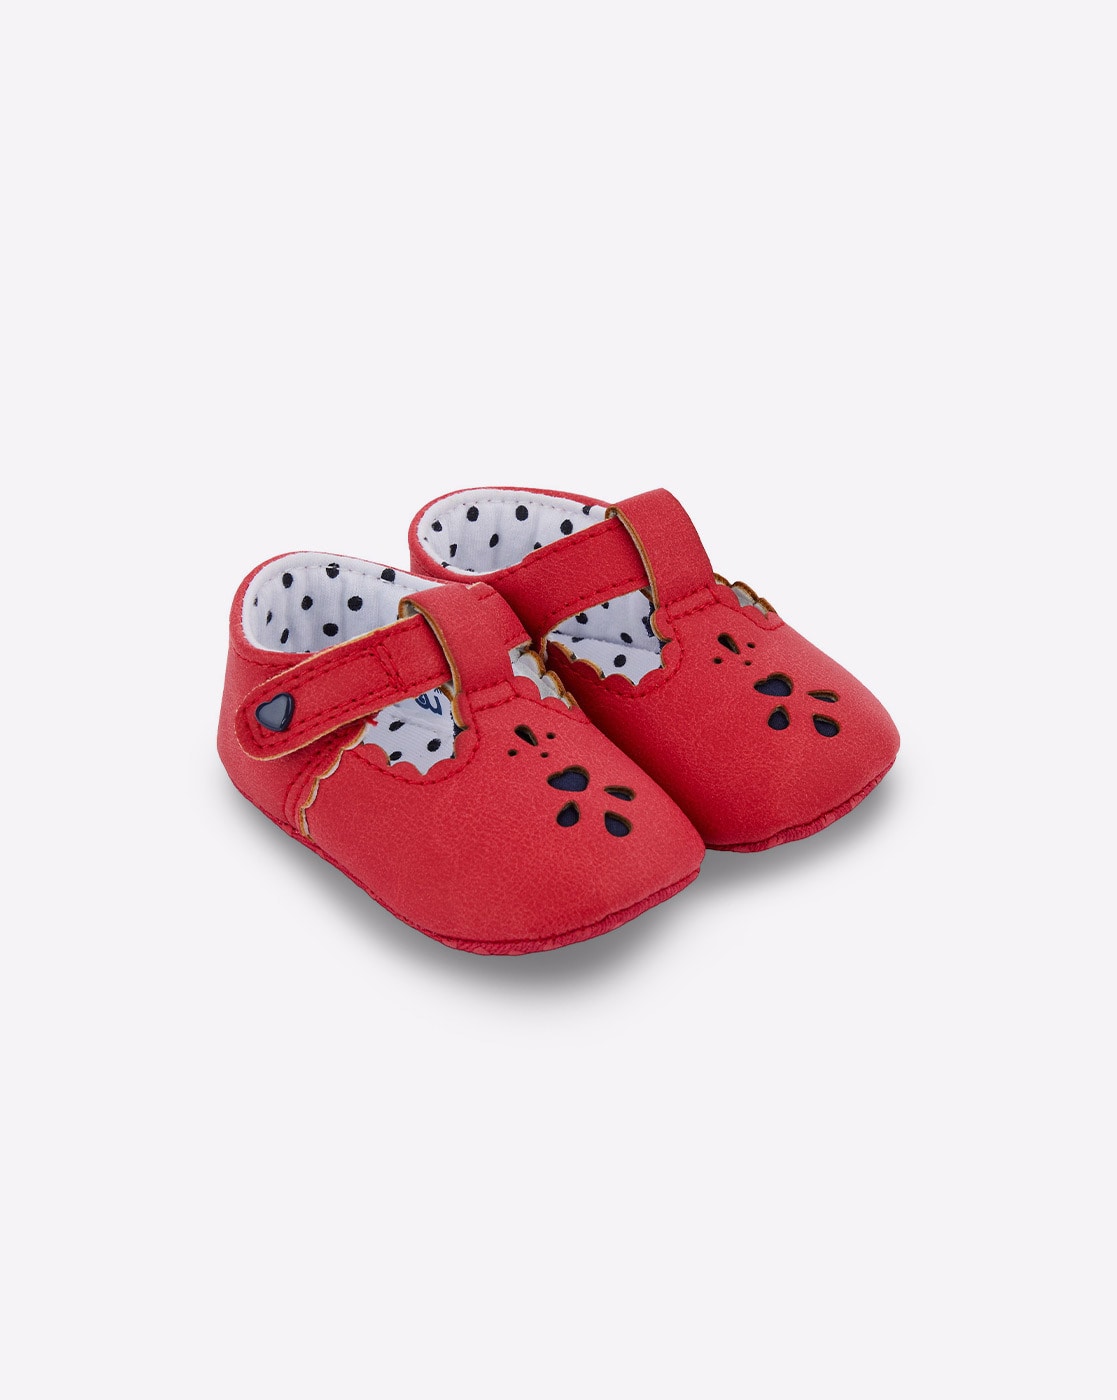 mothercare red shoes